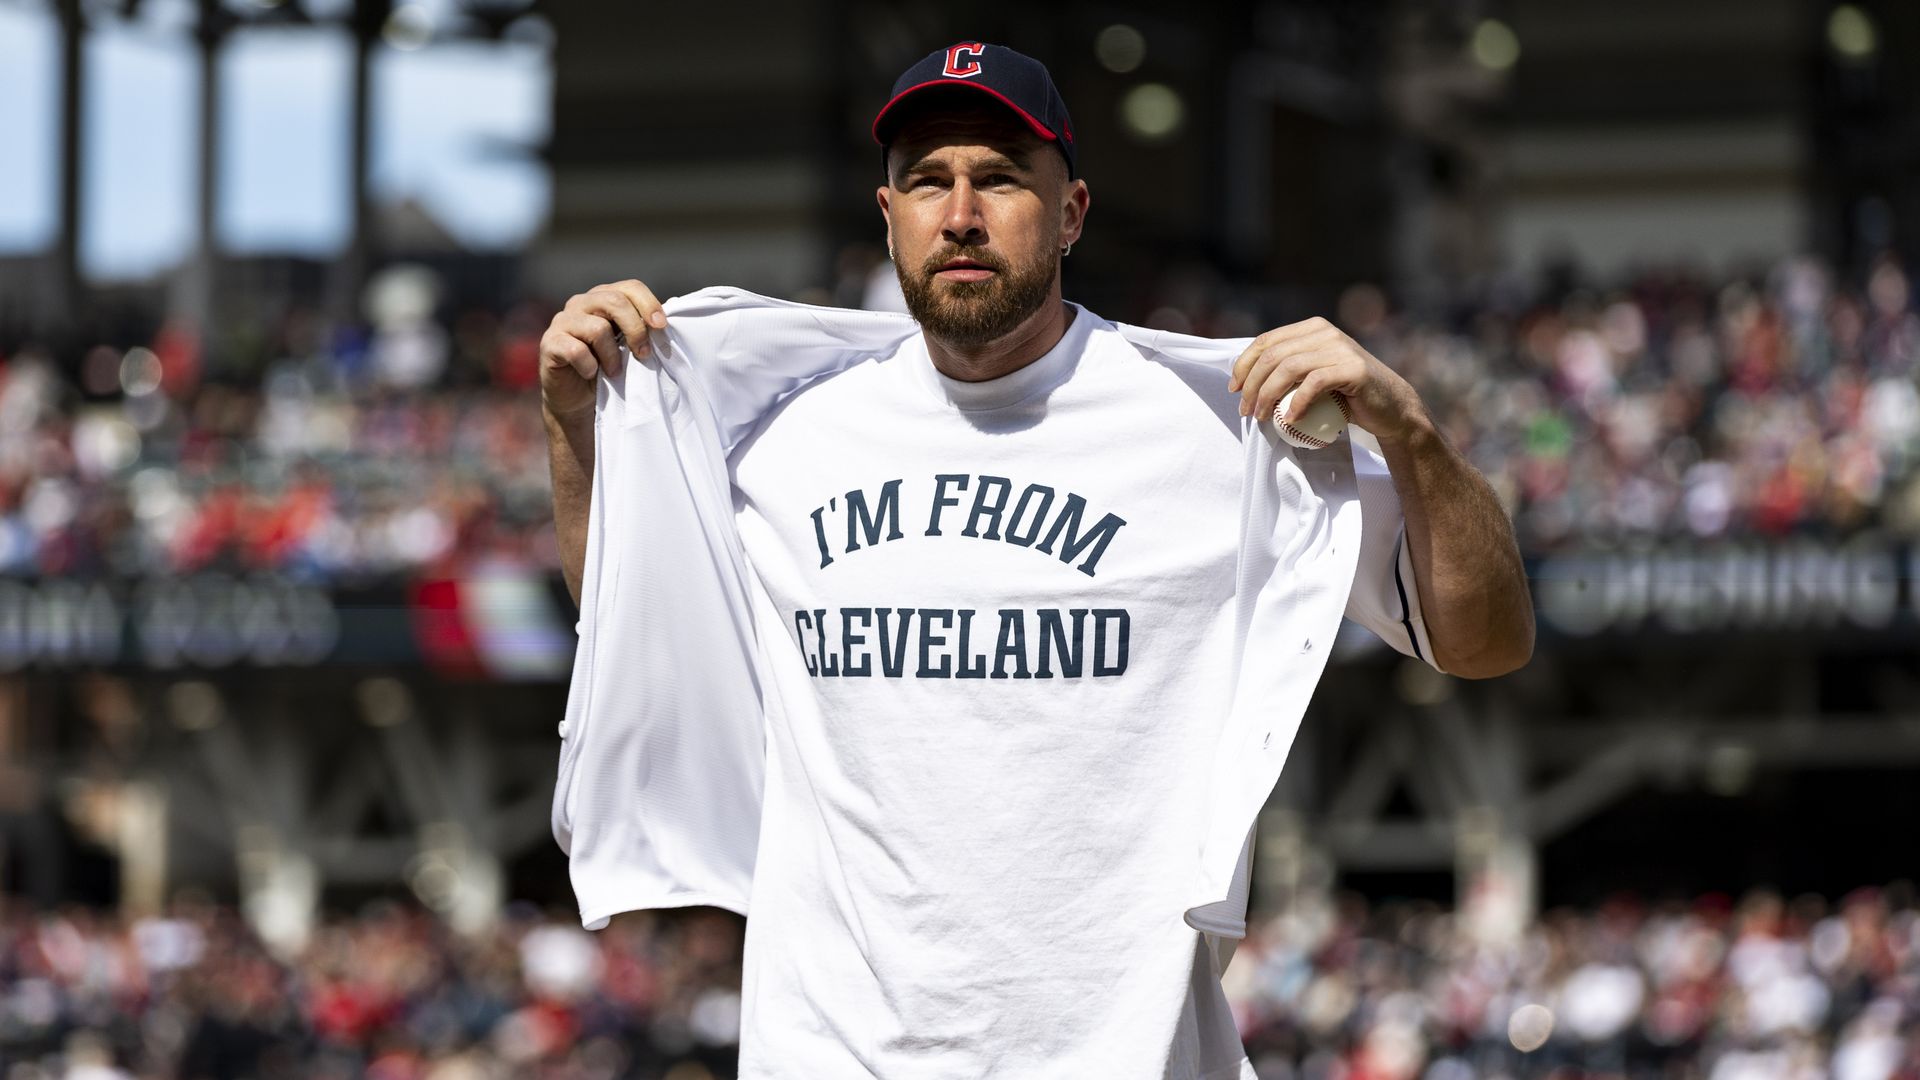 Travis Kelce reveals an "I'm From Cleveland" shirt on the mound at the Cleveland Guardians game. 